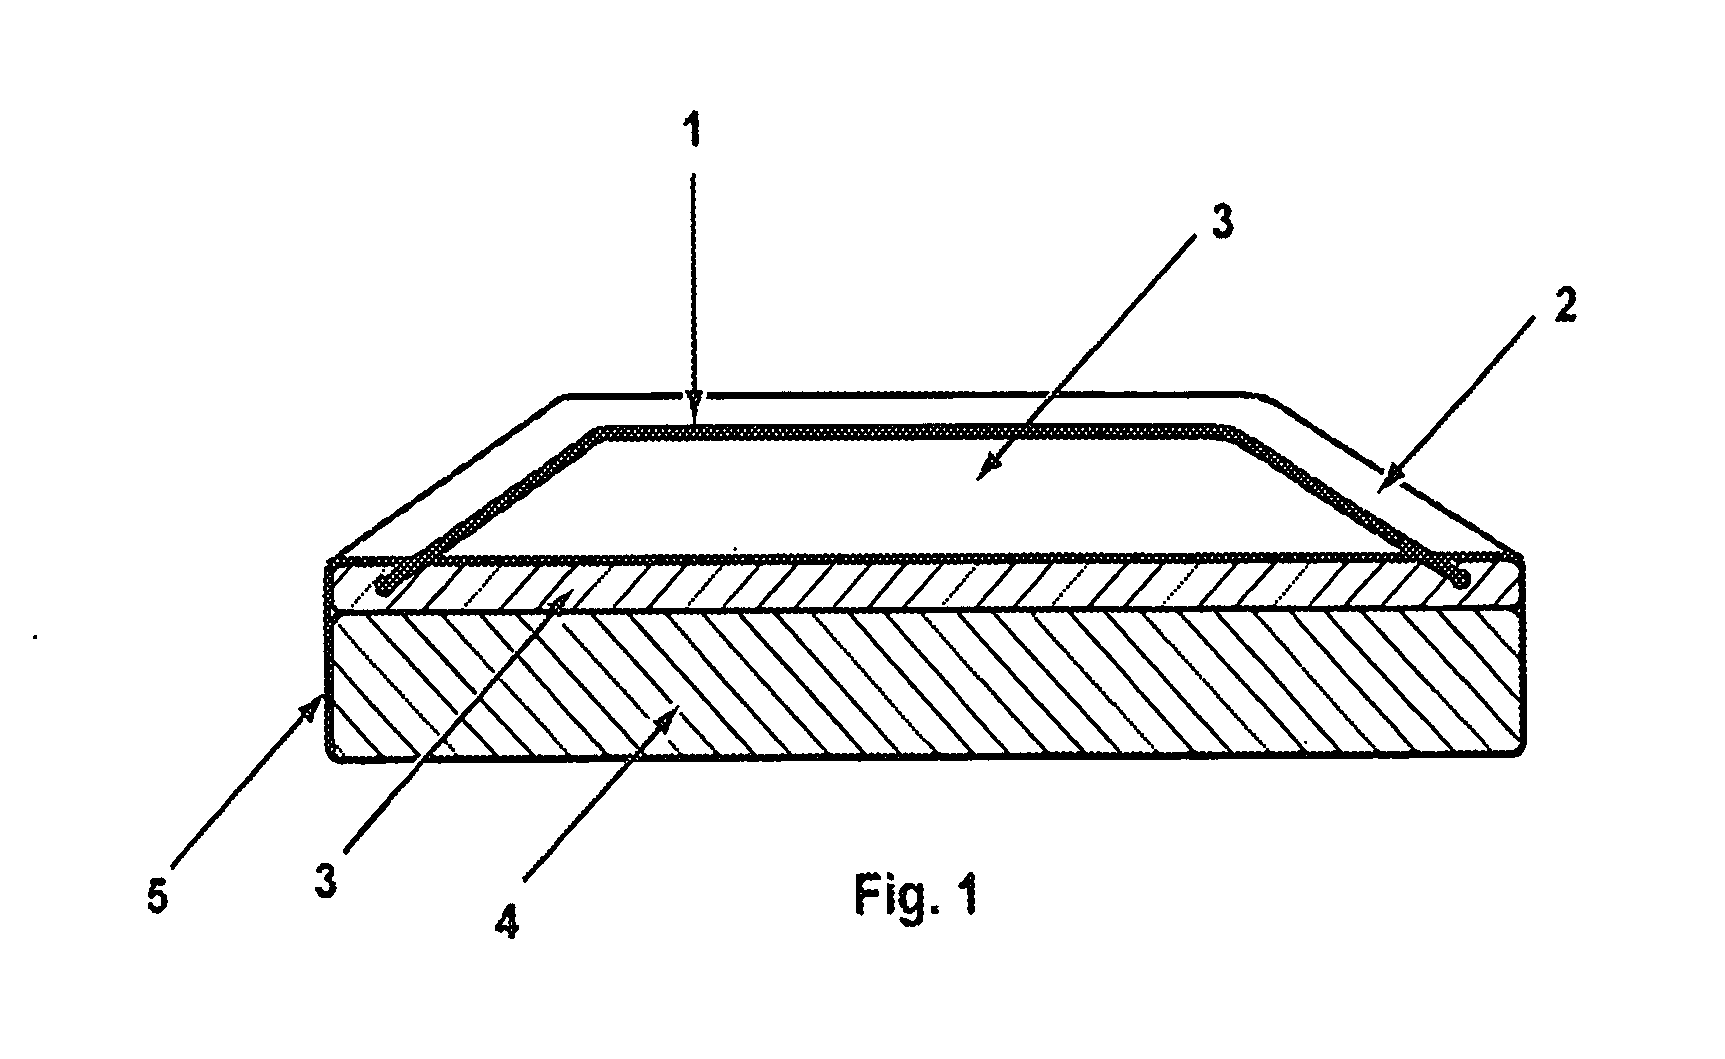 Microwave devices for treating biological samples and tissue and methods for using same